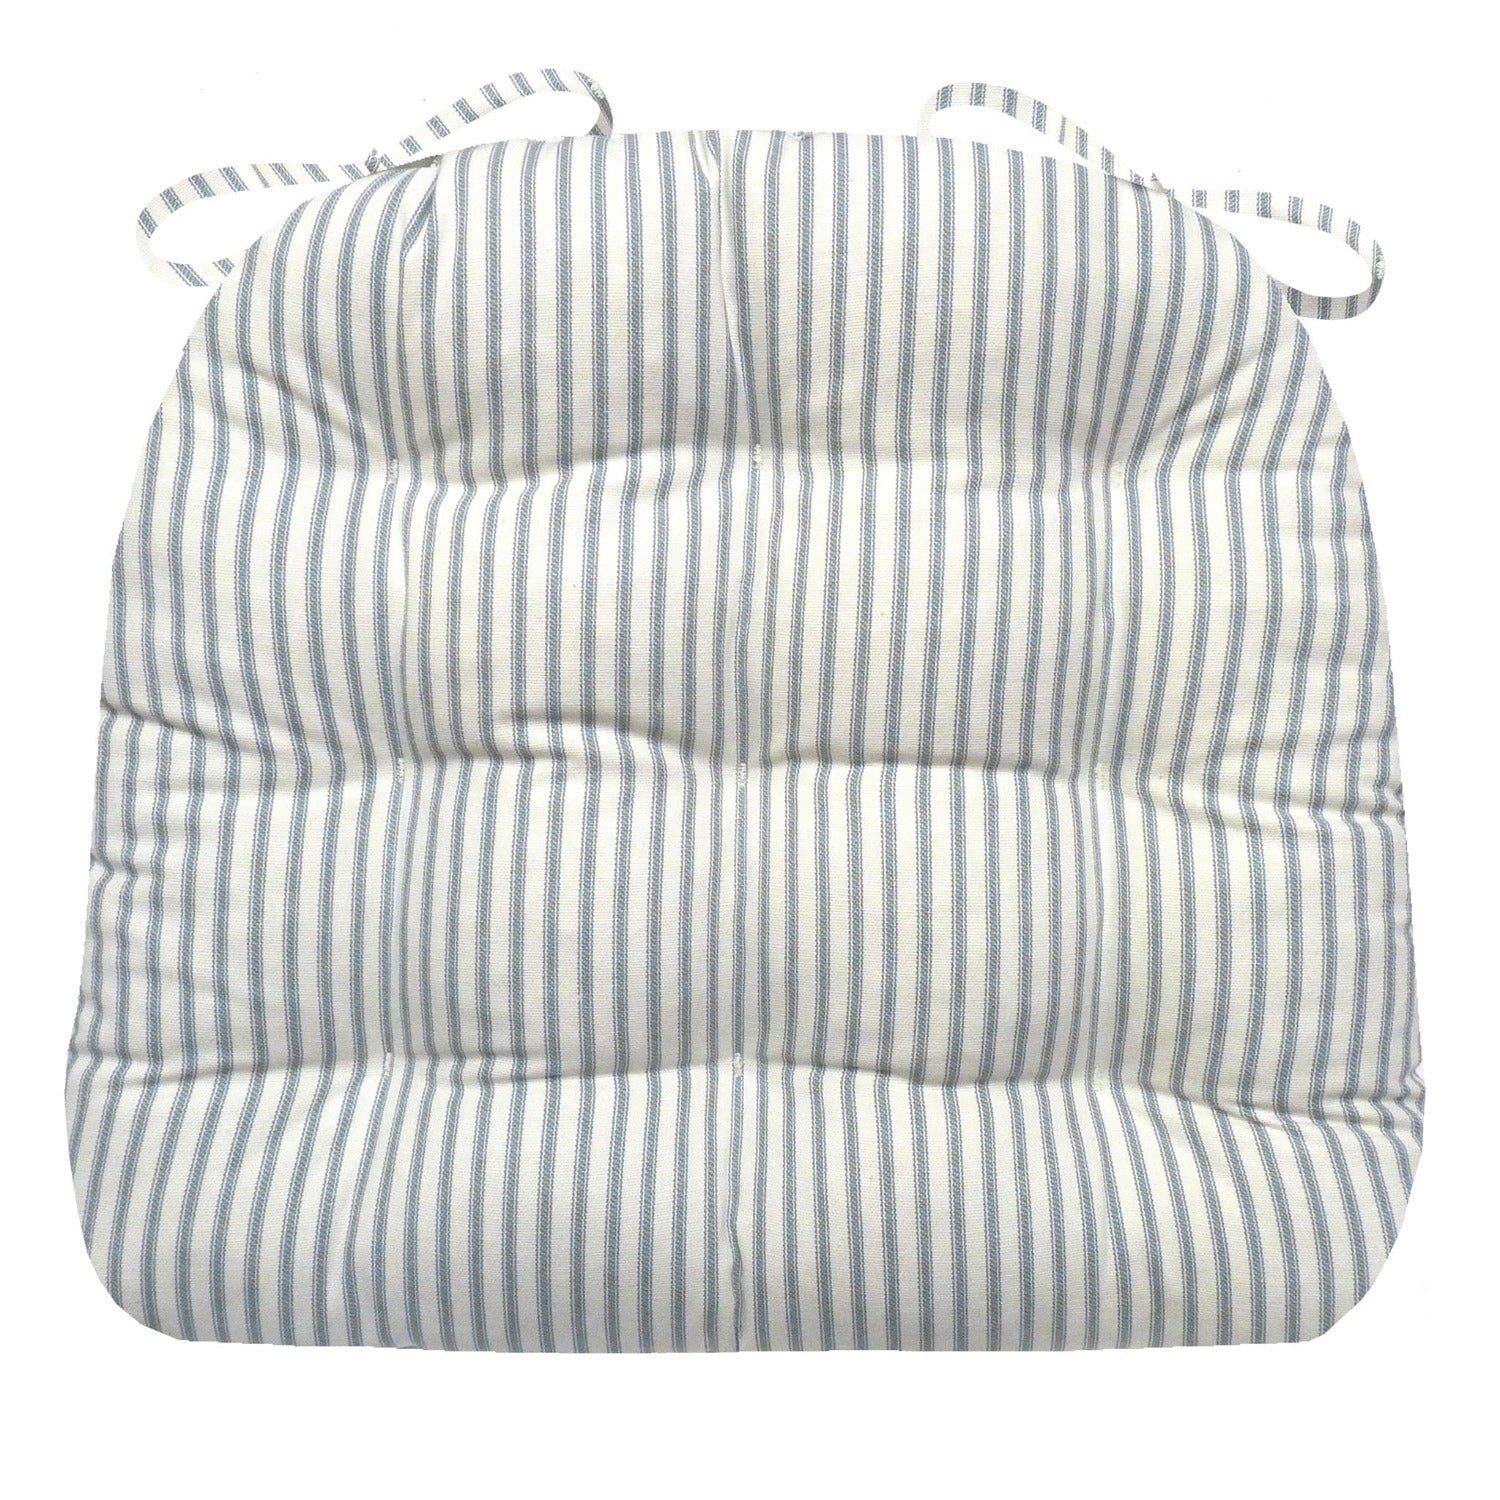 blue stripe chair cushions with light blue ticking stripe on cotton from Vermont